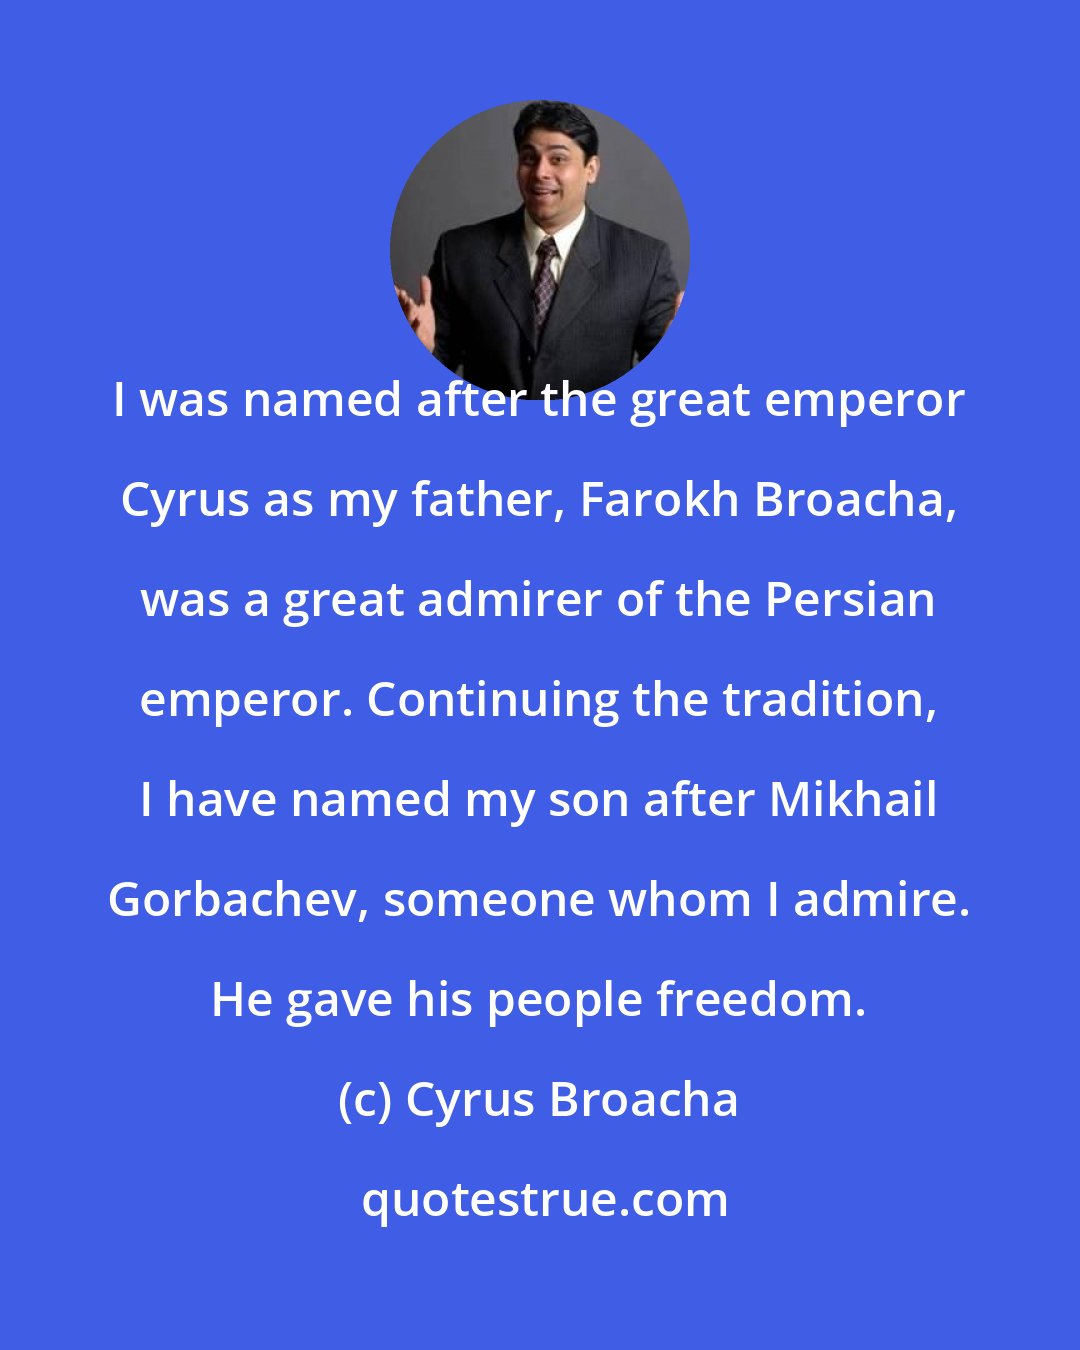 Cyrus Broacha: I was named after the great emperor Cyrus as my father, Farokh Broacha, was a great admirer of the Persian emperor. Continuing the tradition, I have named my son after Mikhail Gorbachev, someone whom I admire. He gave his people freedom.